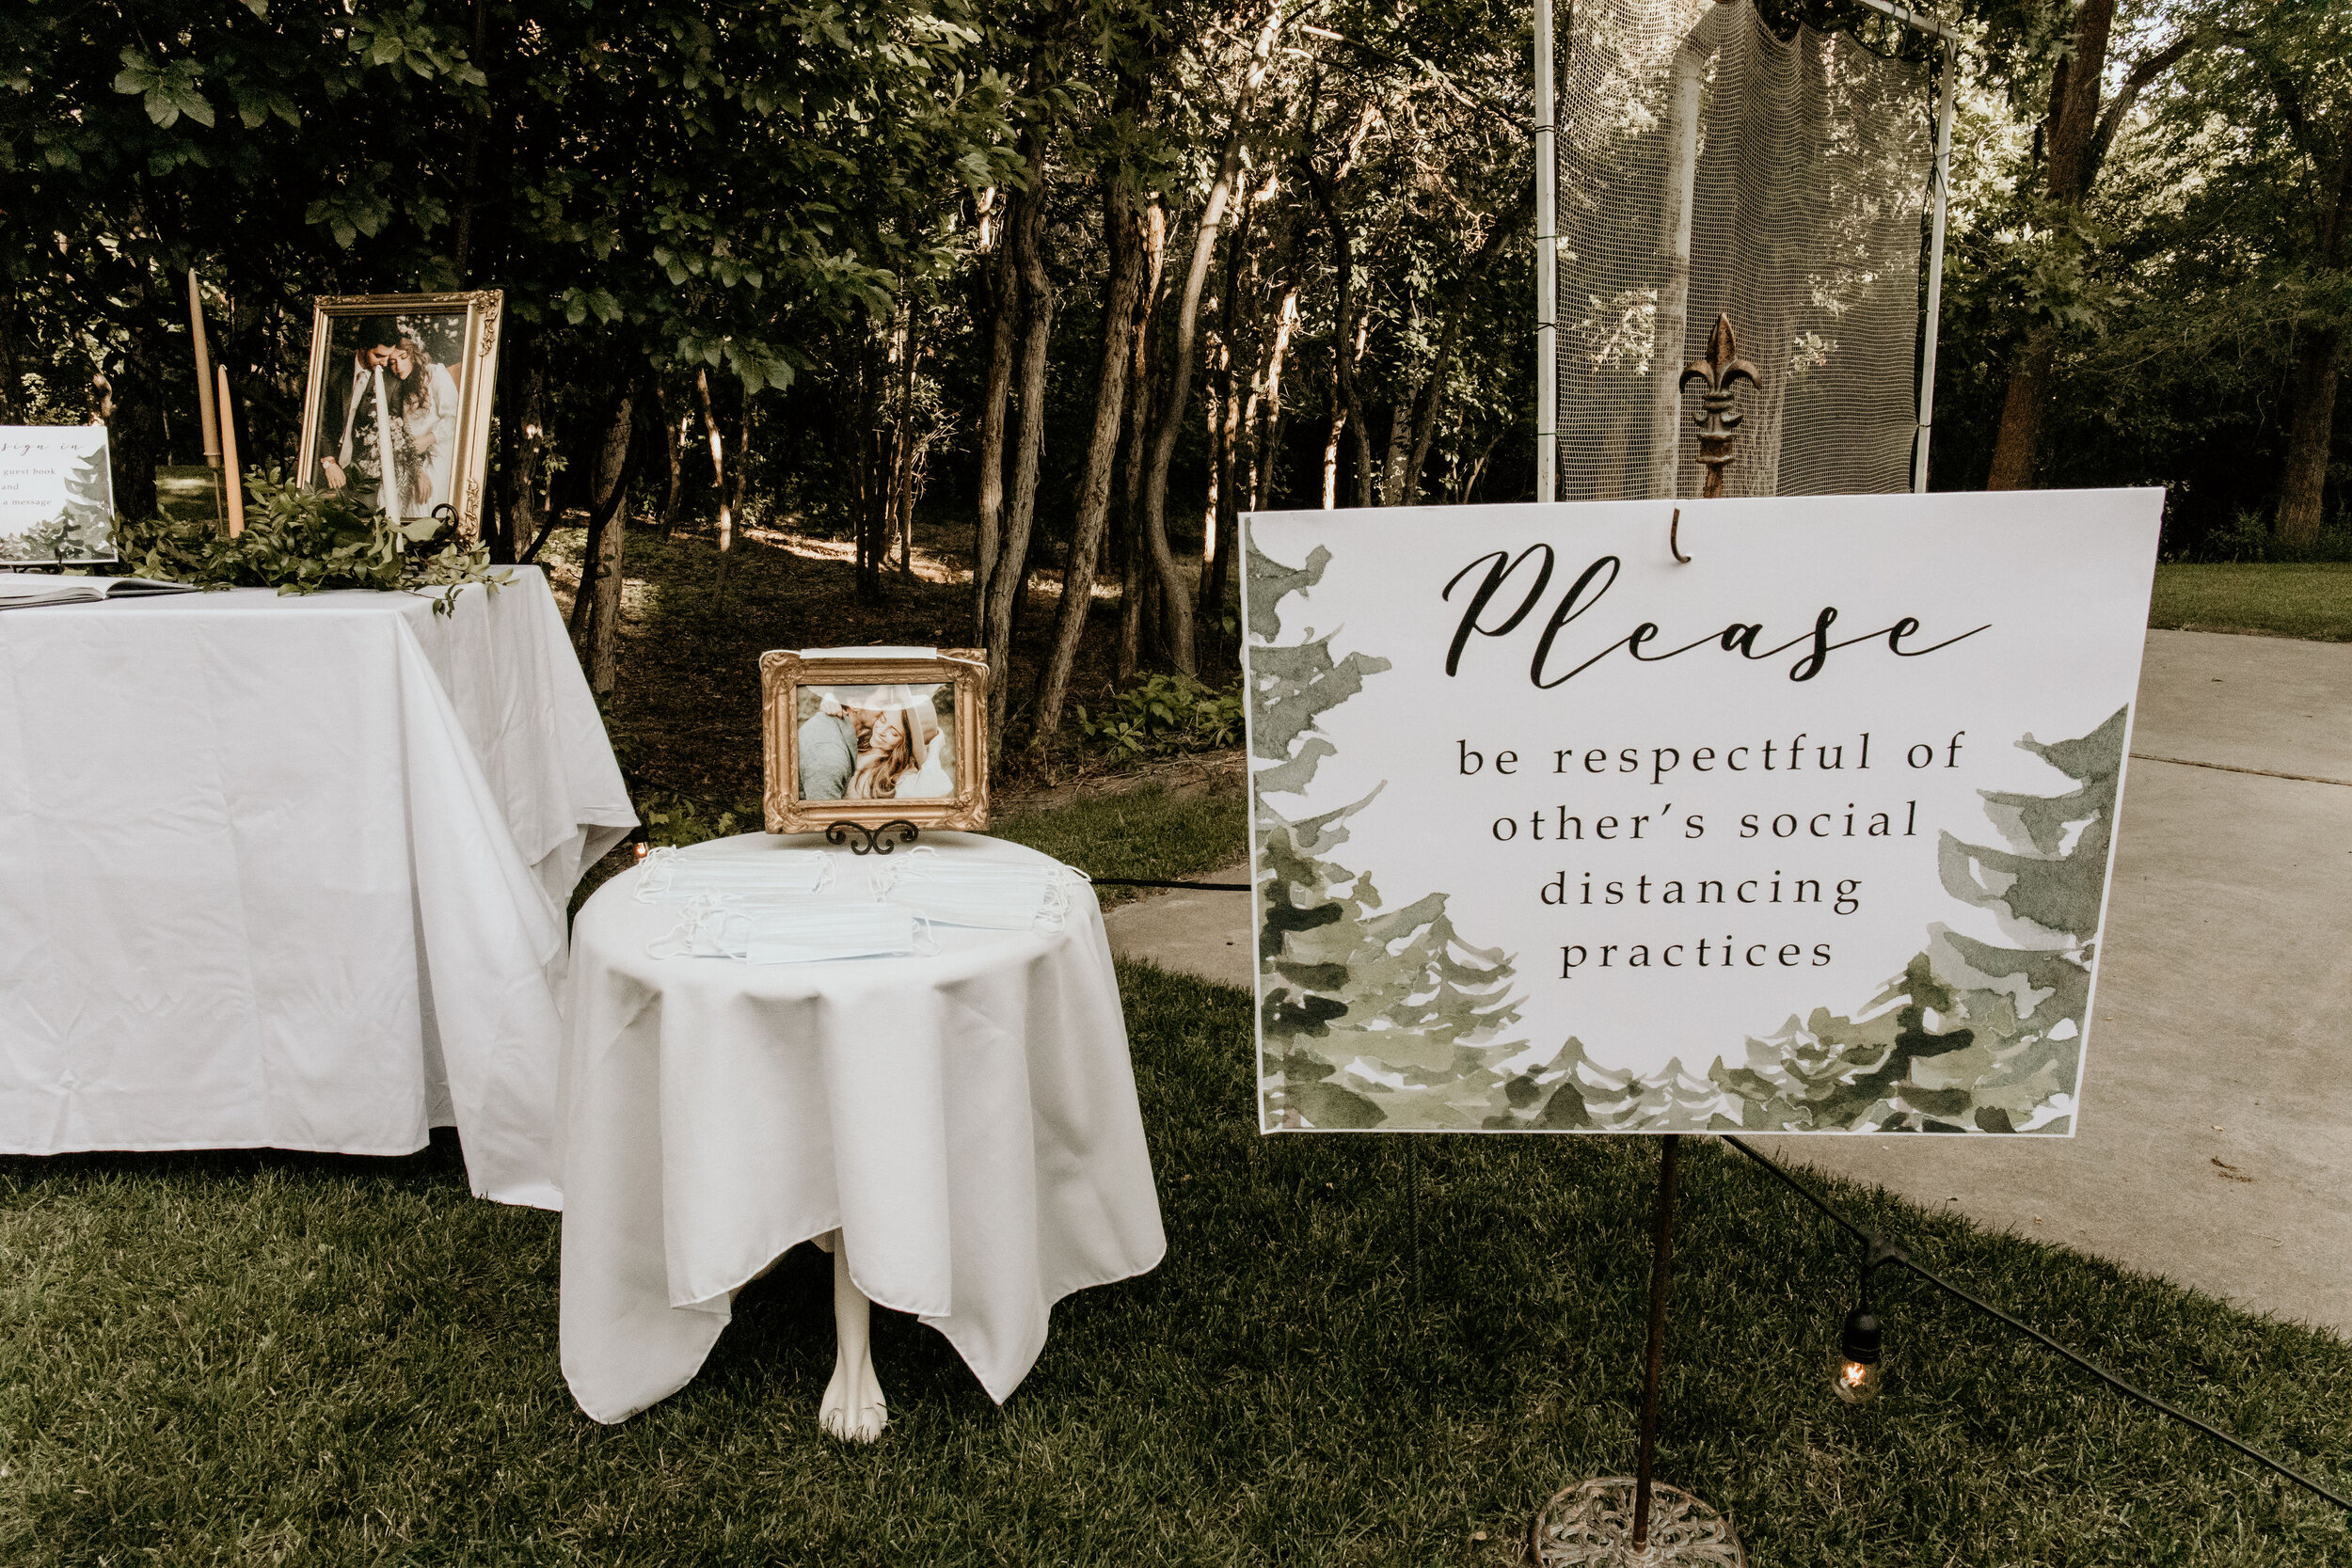  We wanted to be as respectful of social distancing guidelines as we could, so we made sure to prompt our guests to do the same, as well as offer masks and hand sanitizer. We also had the chairs arranged in small groups, around the yard, to allow peo